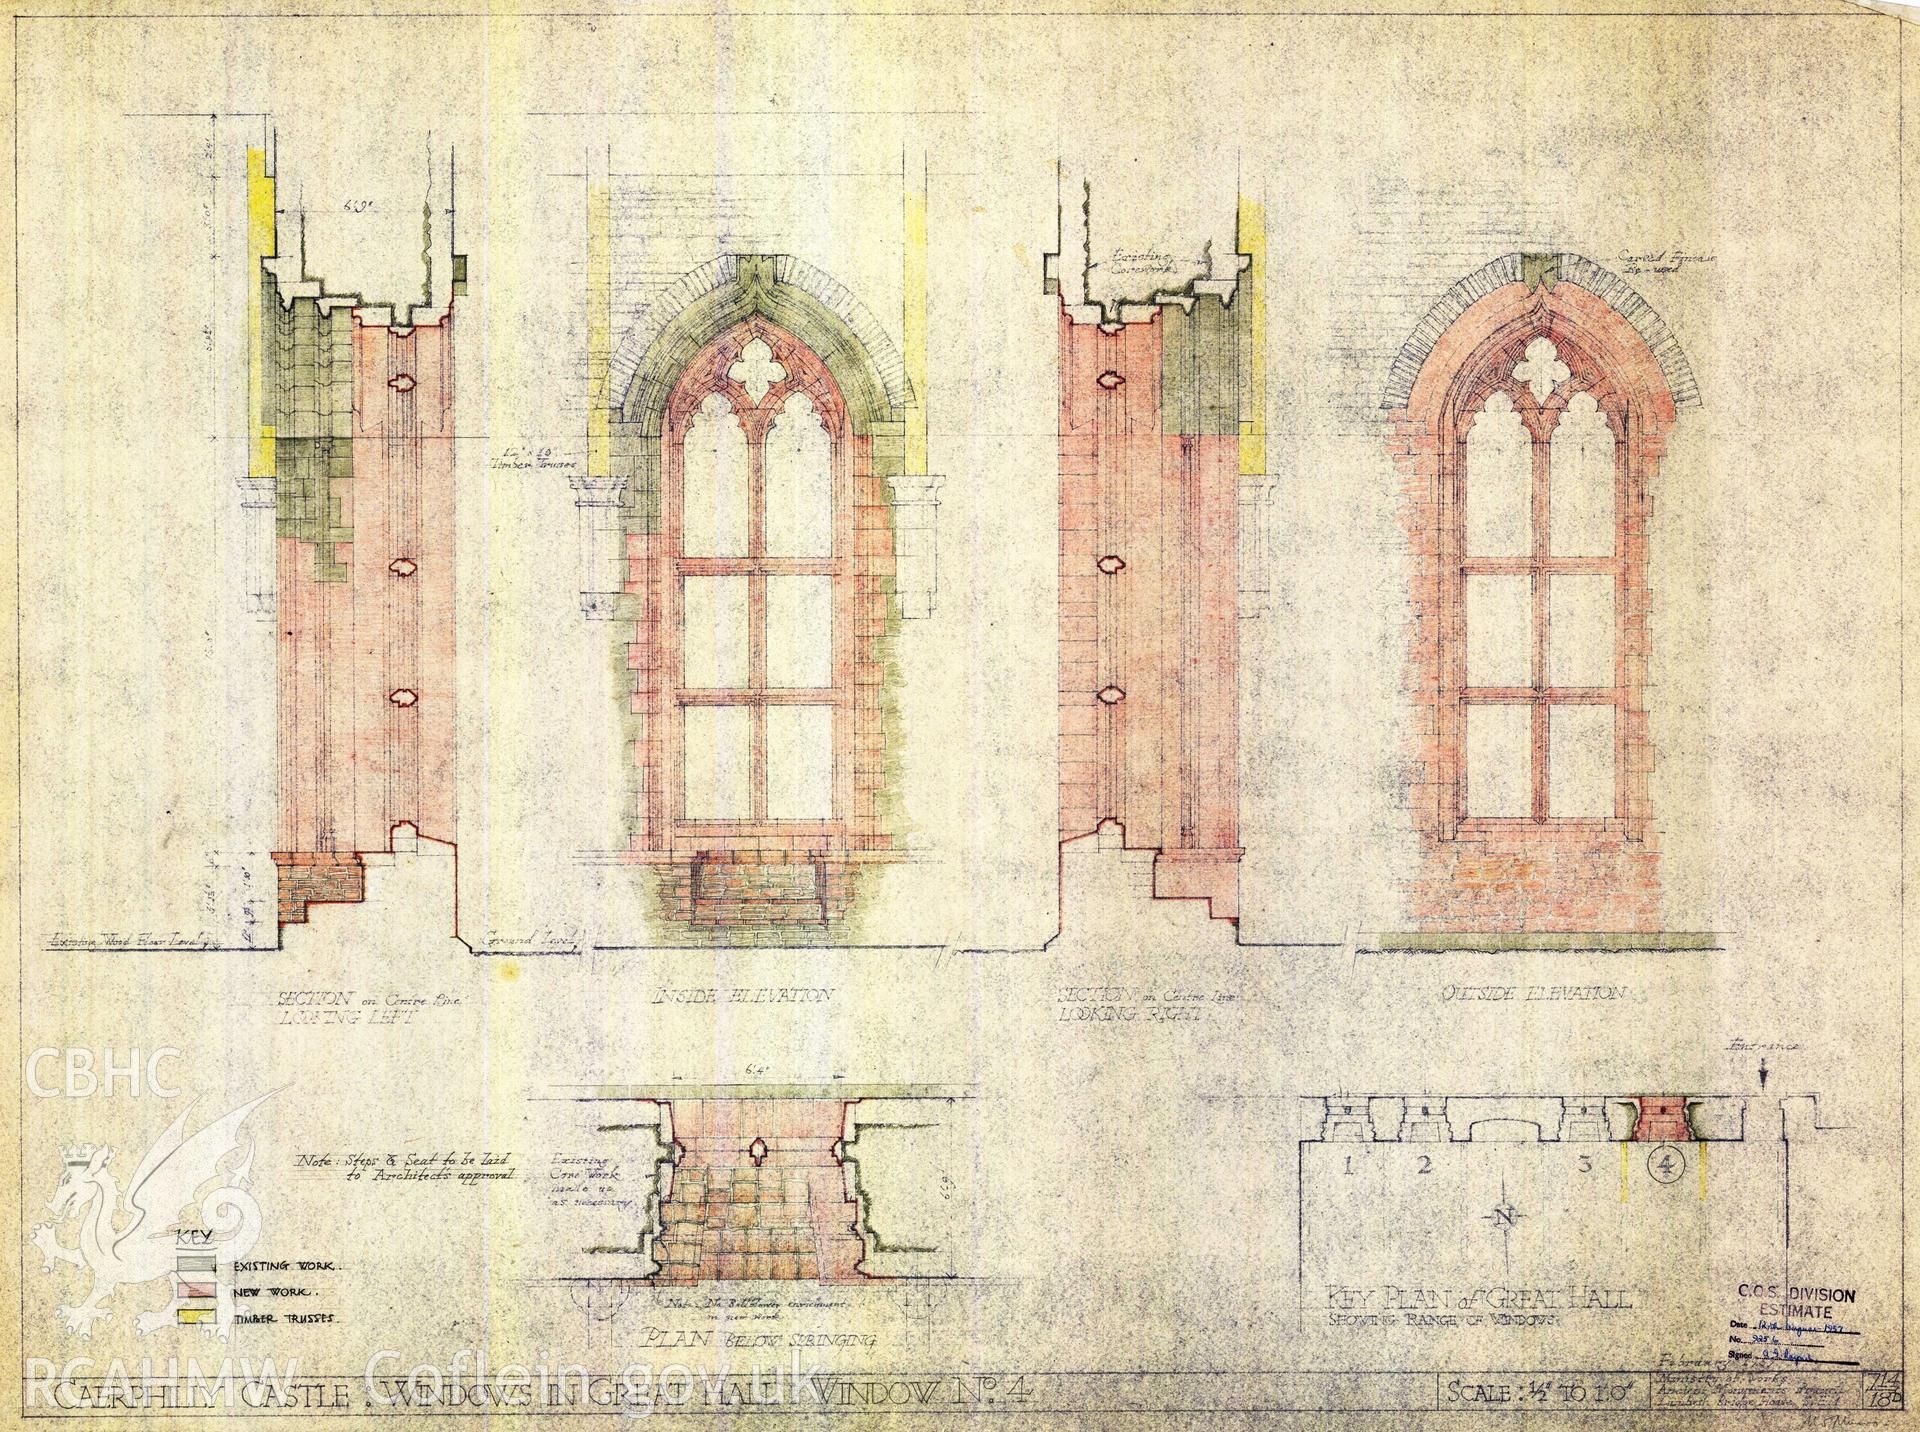 Cadw guardianship monument drawing of Caerphilly Castle. Hall, window 4, in+out for costing. Cadw ref. no: 714/18D. Scale 1:24.